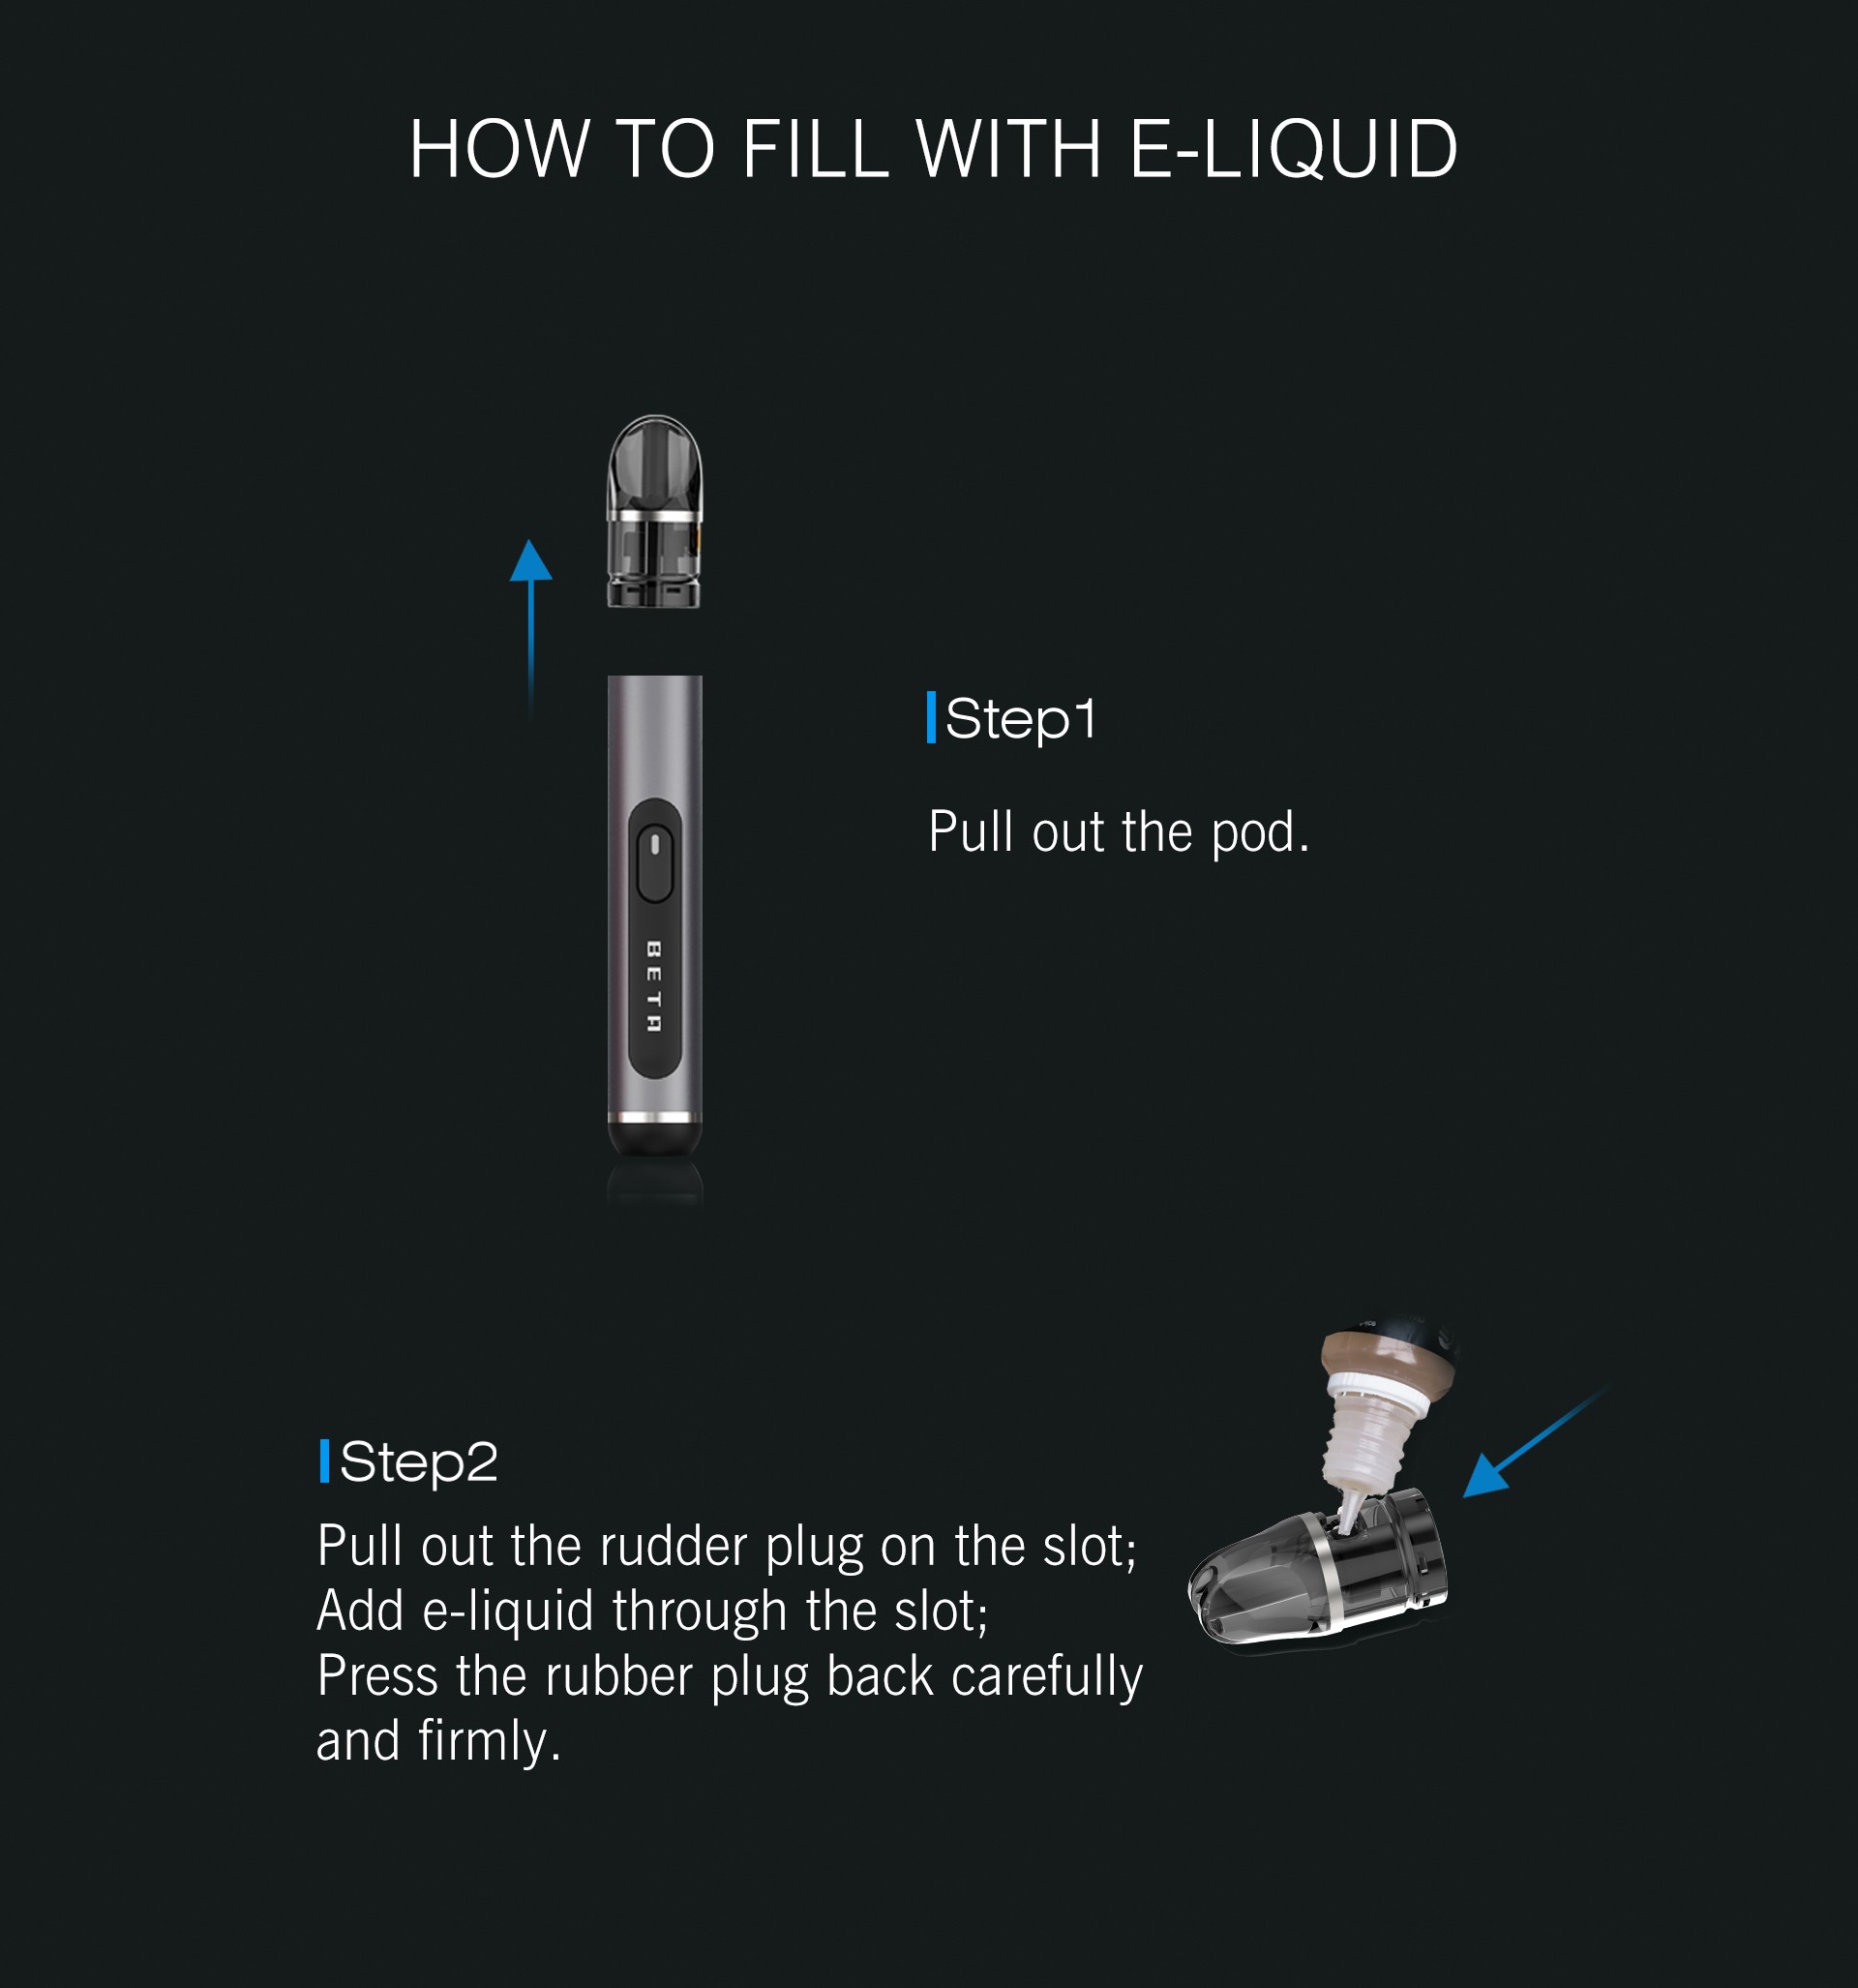 How to fill with e-liquid